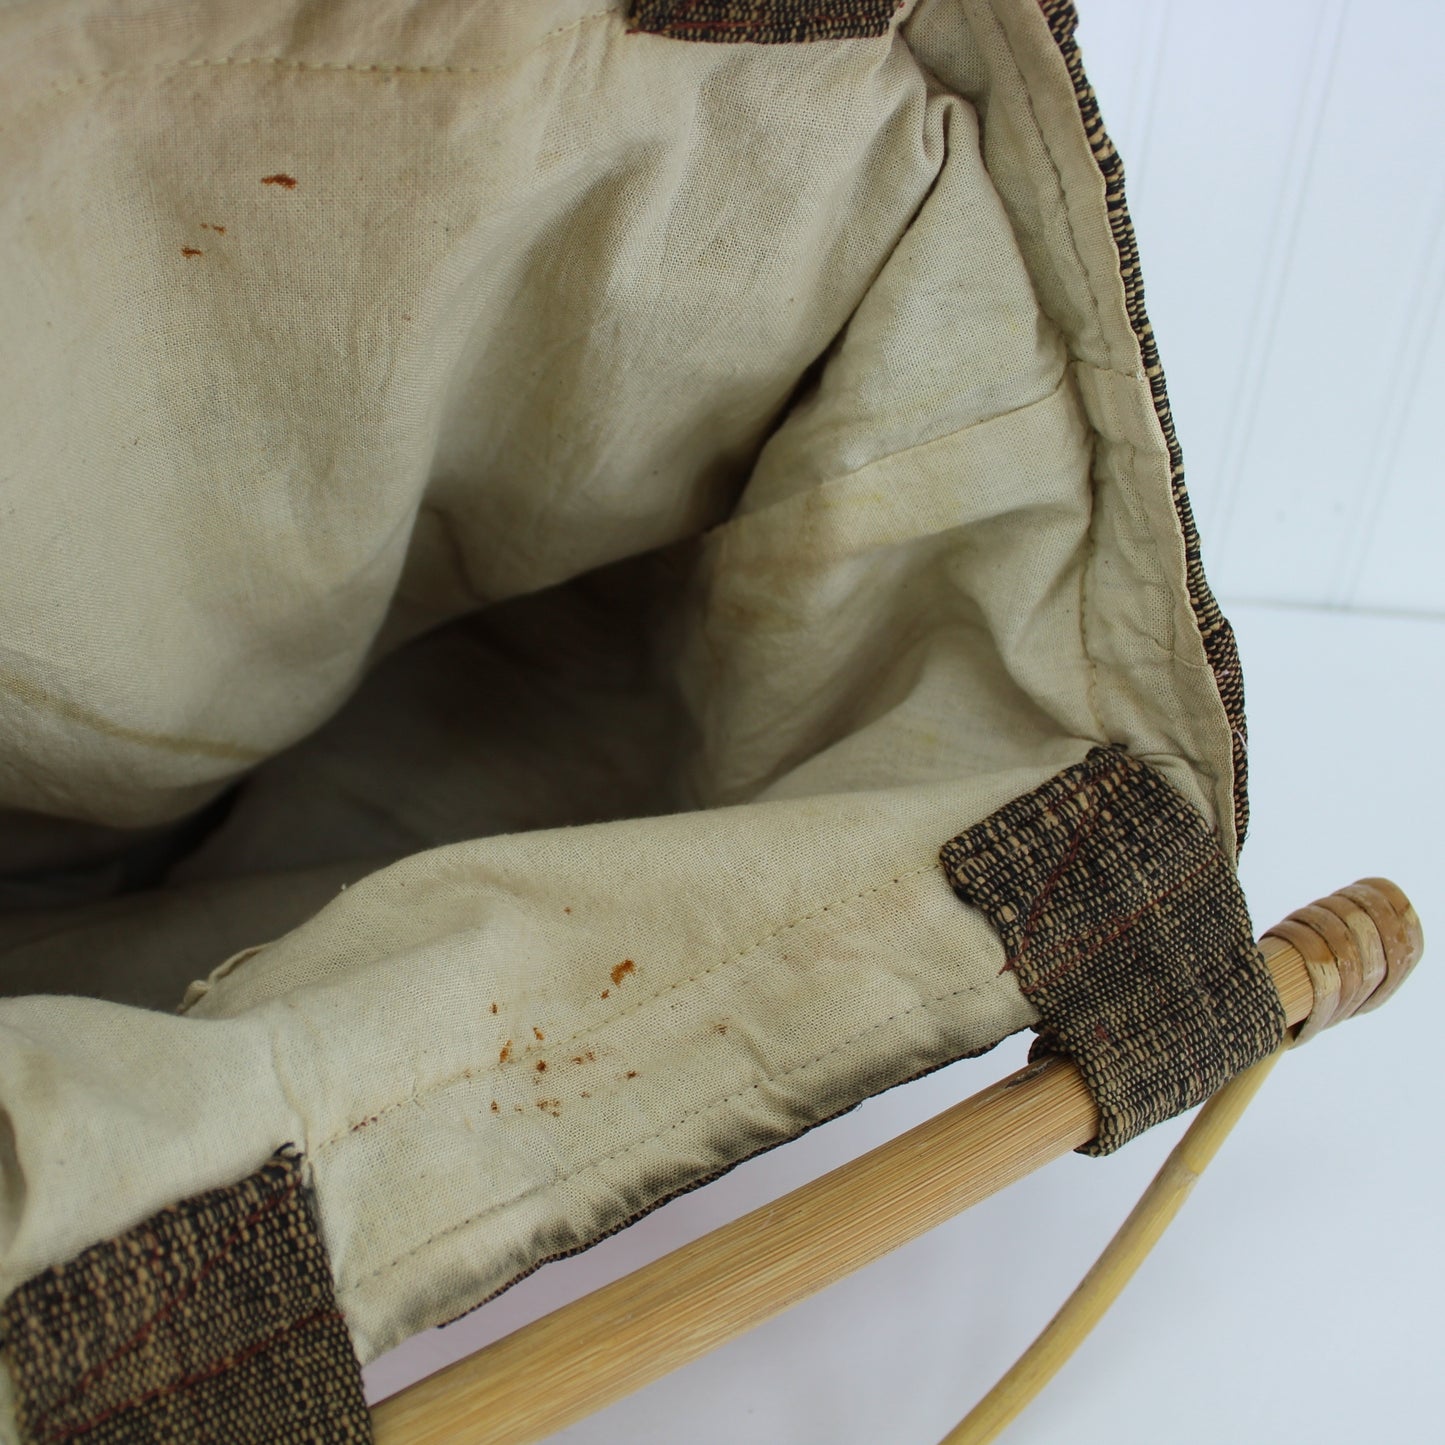 Hand Made Old Tote Granny Bag Craft Travel Bag Heavy Woven Fiber Muslin Lining Bamboo Handles some stains in lining